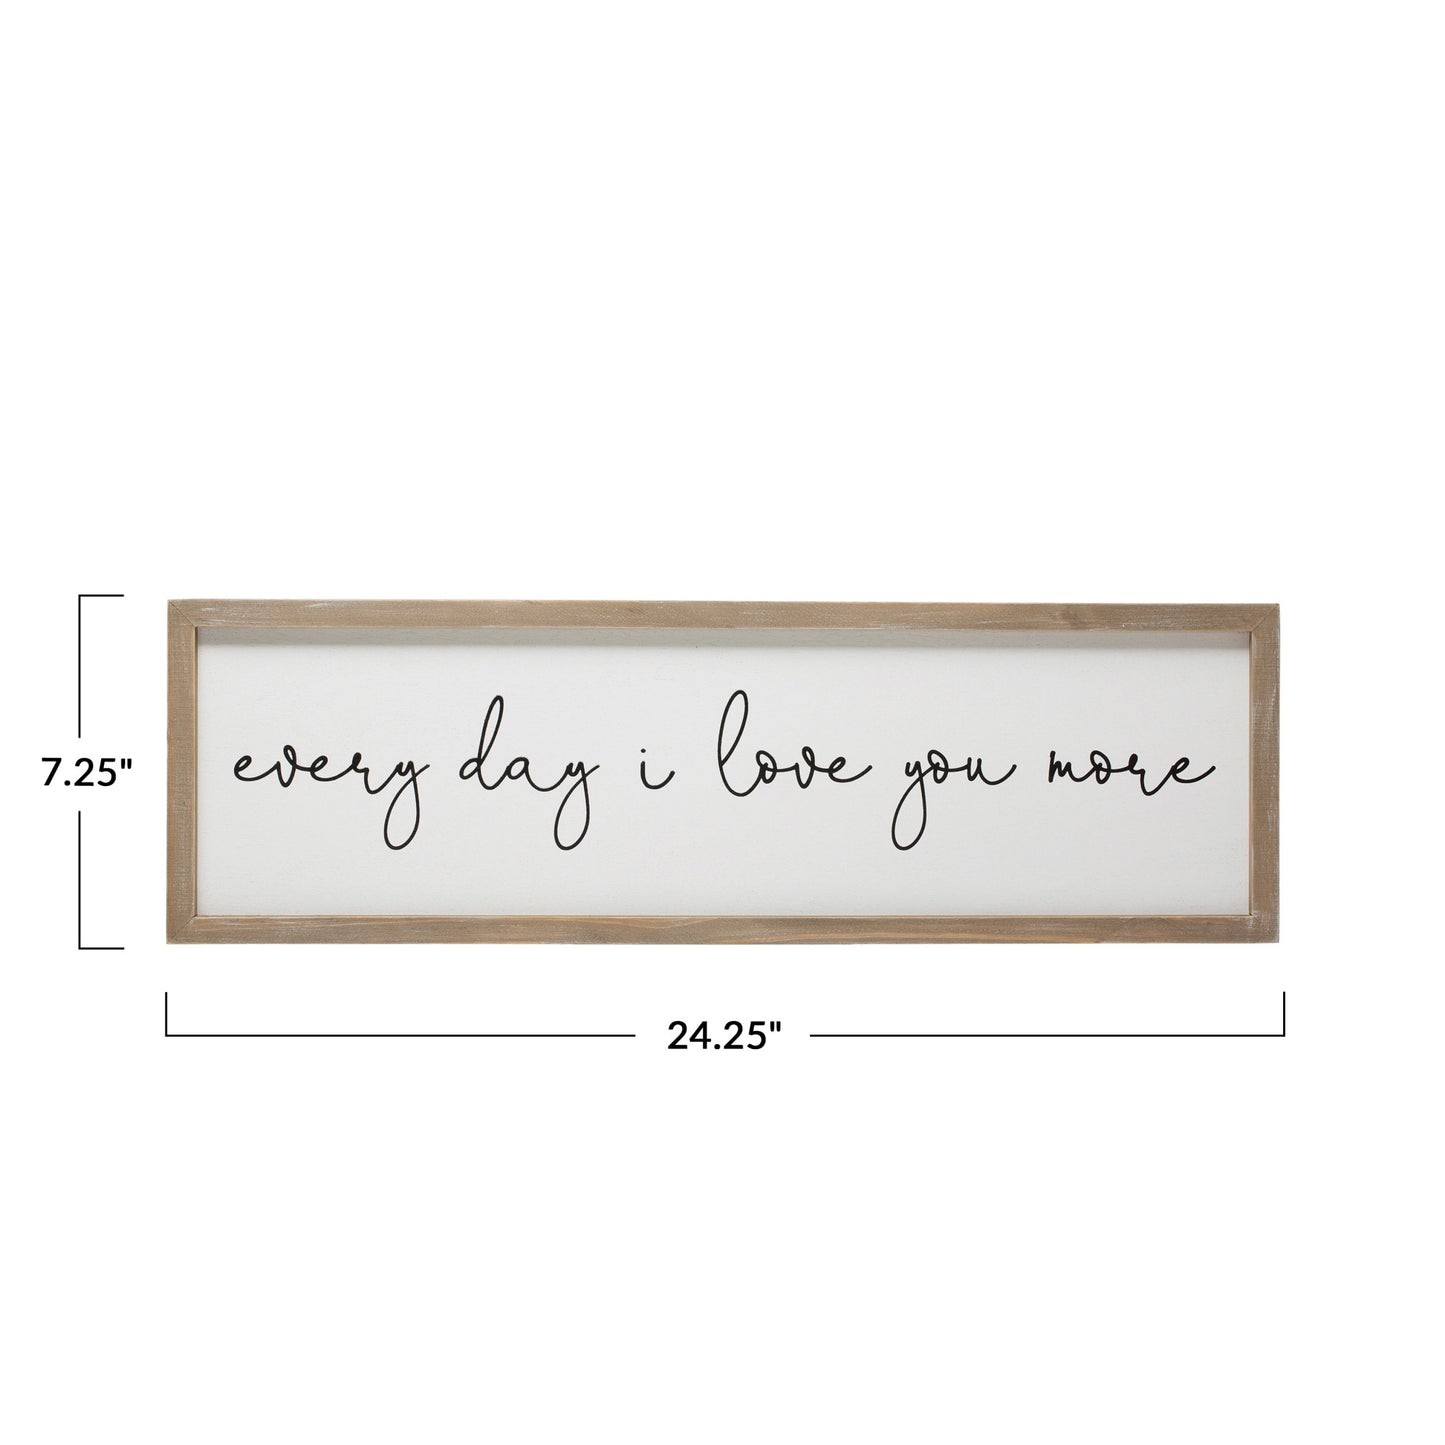 Every day I love you more Wood Framed Wall Decor